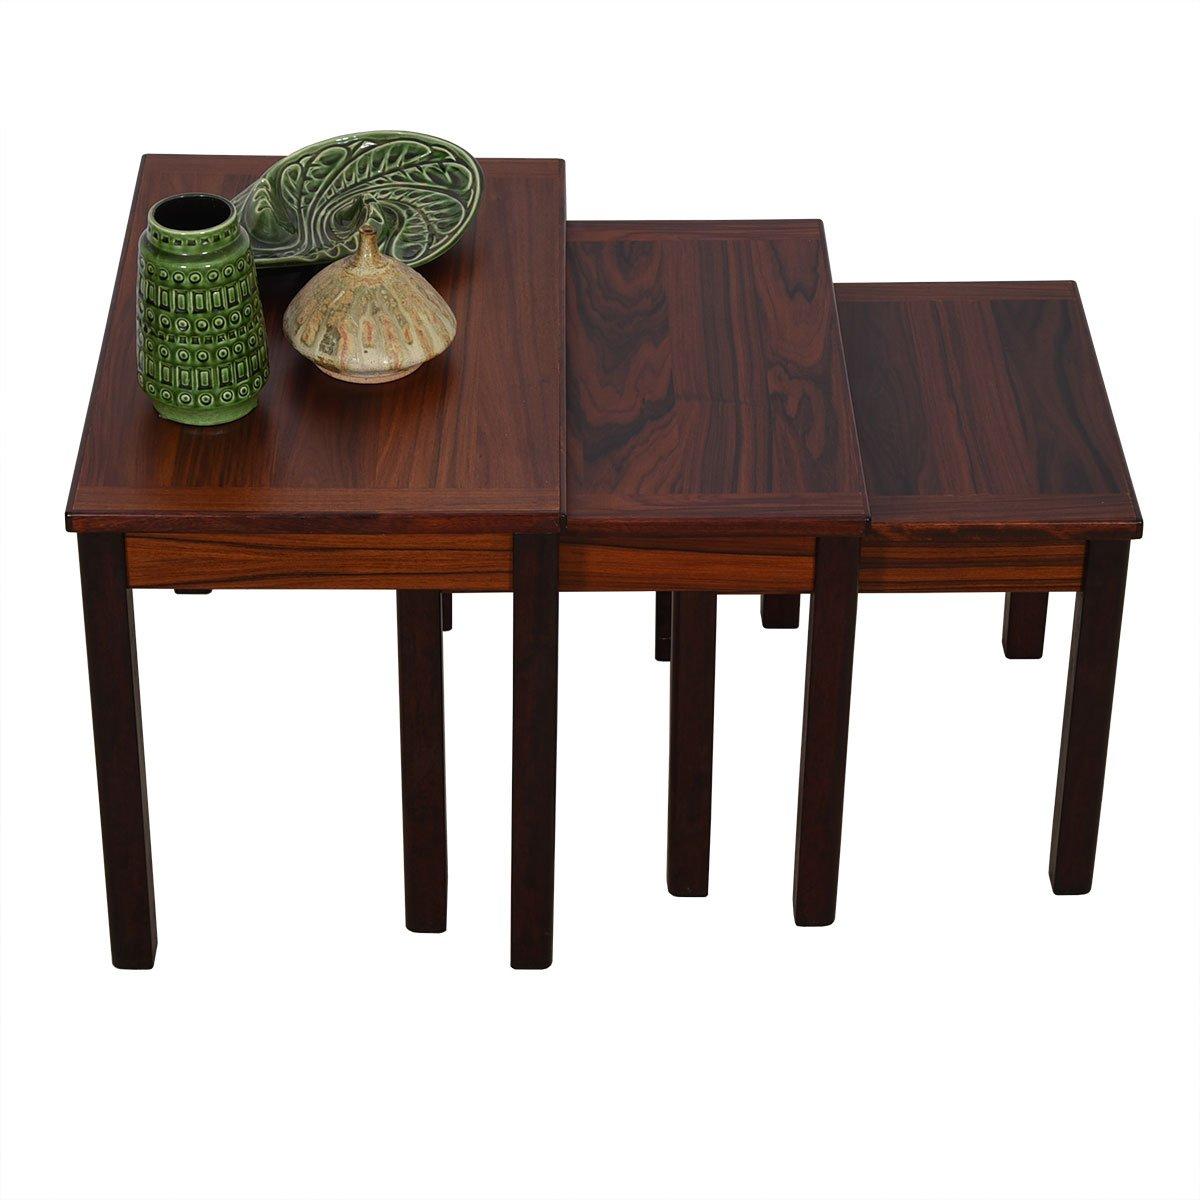 Set of 3 Danish Modern Nesting Tables in Rosewood For Sale 5